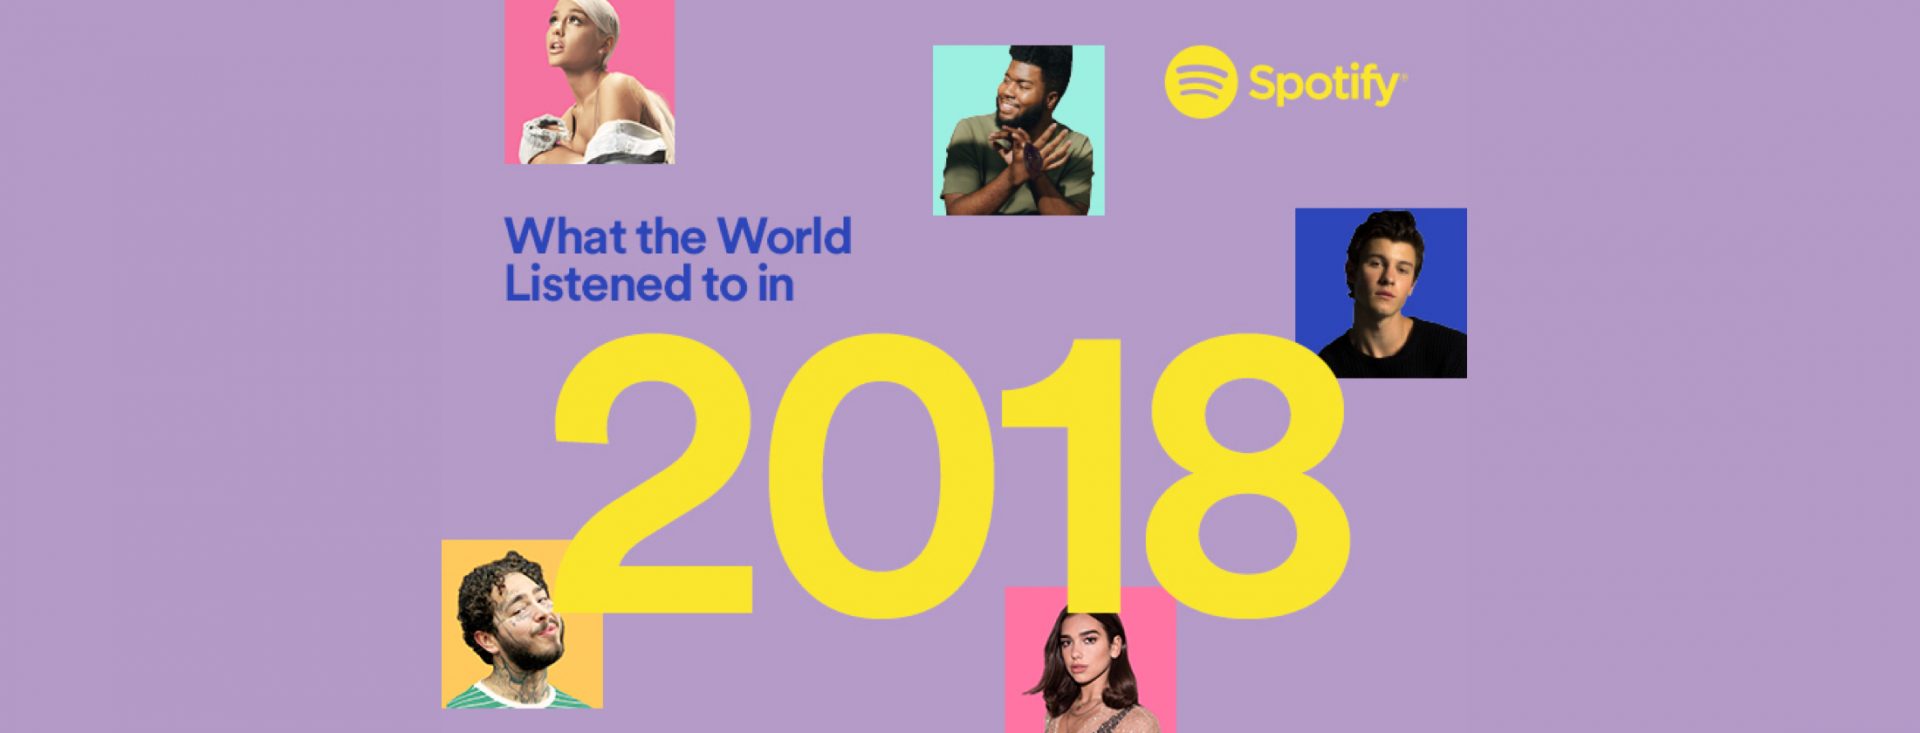 drivende royalty Australien The Top Songs, Artists, Playlists, and Podcasts of 2018 — Spotify